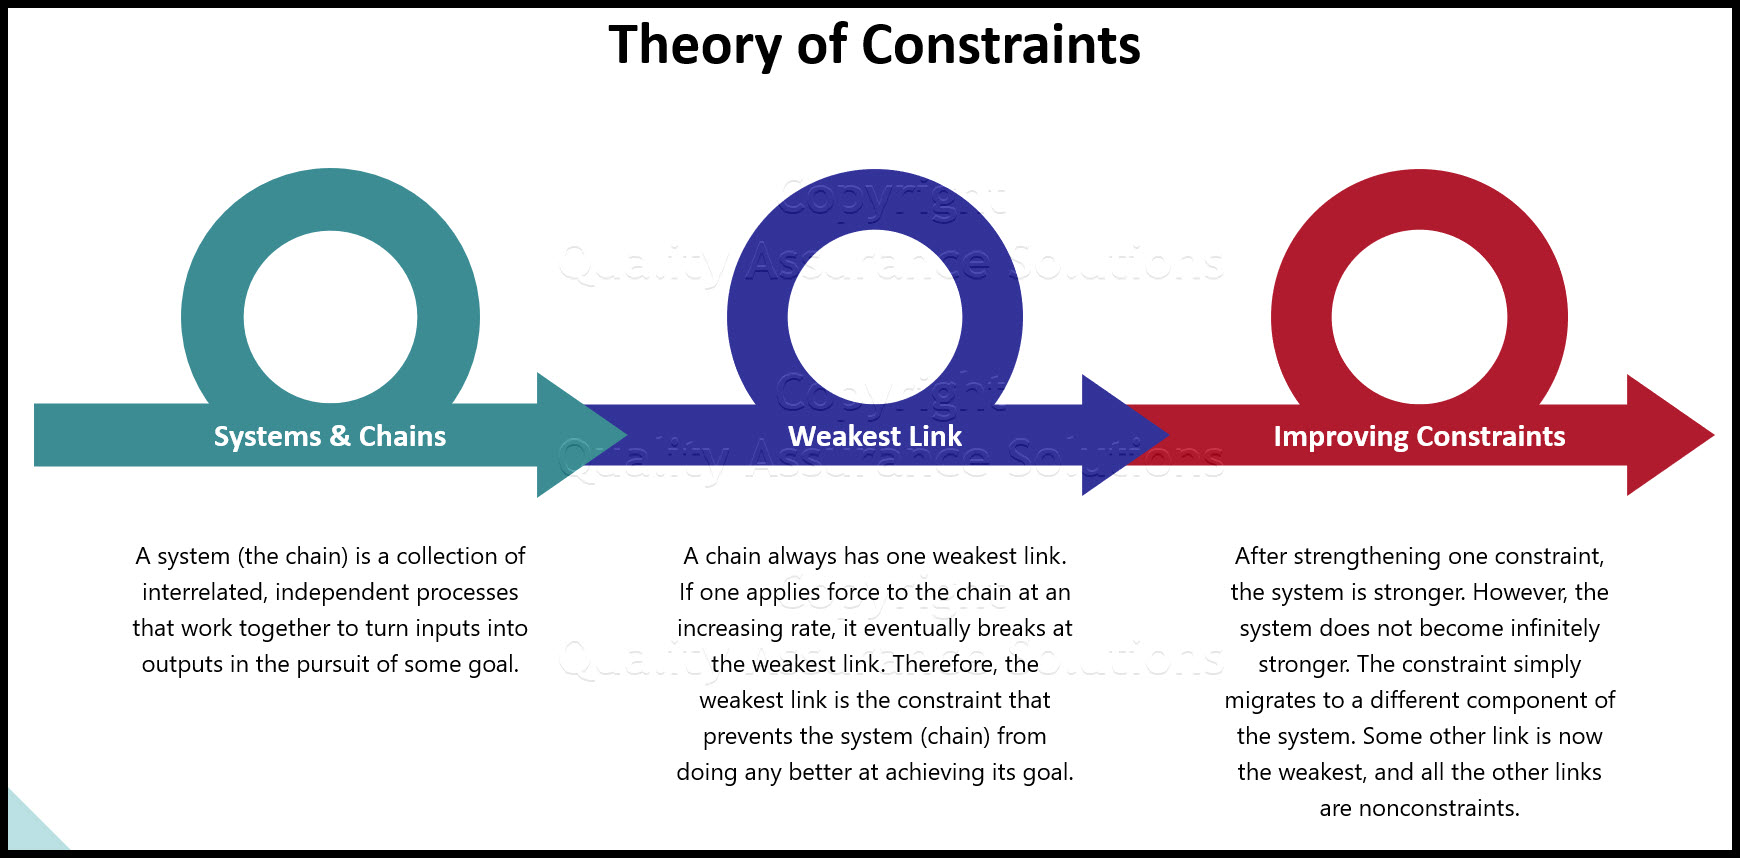 See our article on Theory of Constraints. Every system keeps at least one constraint that limits the system outputs